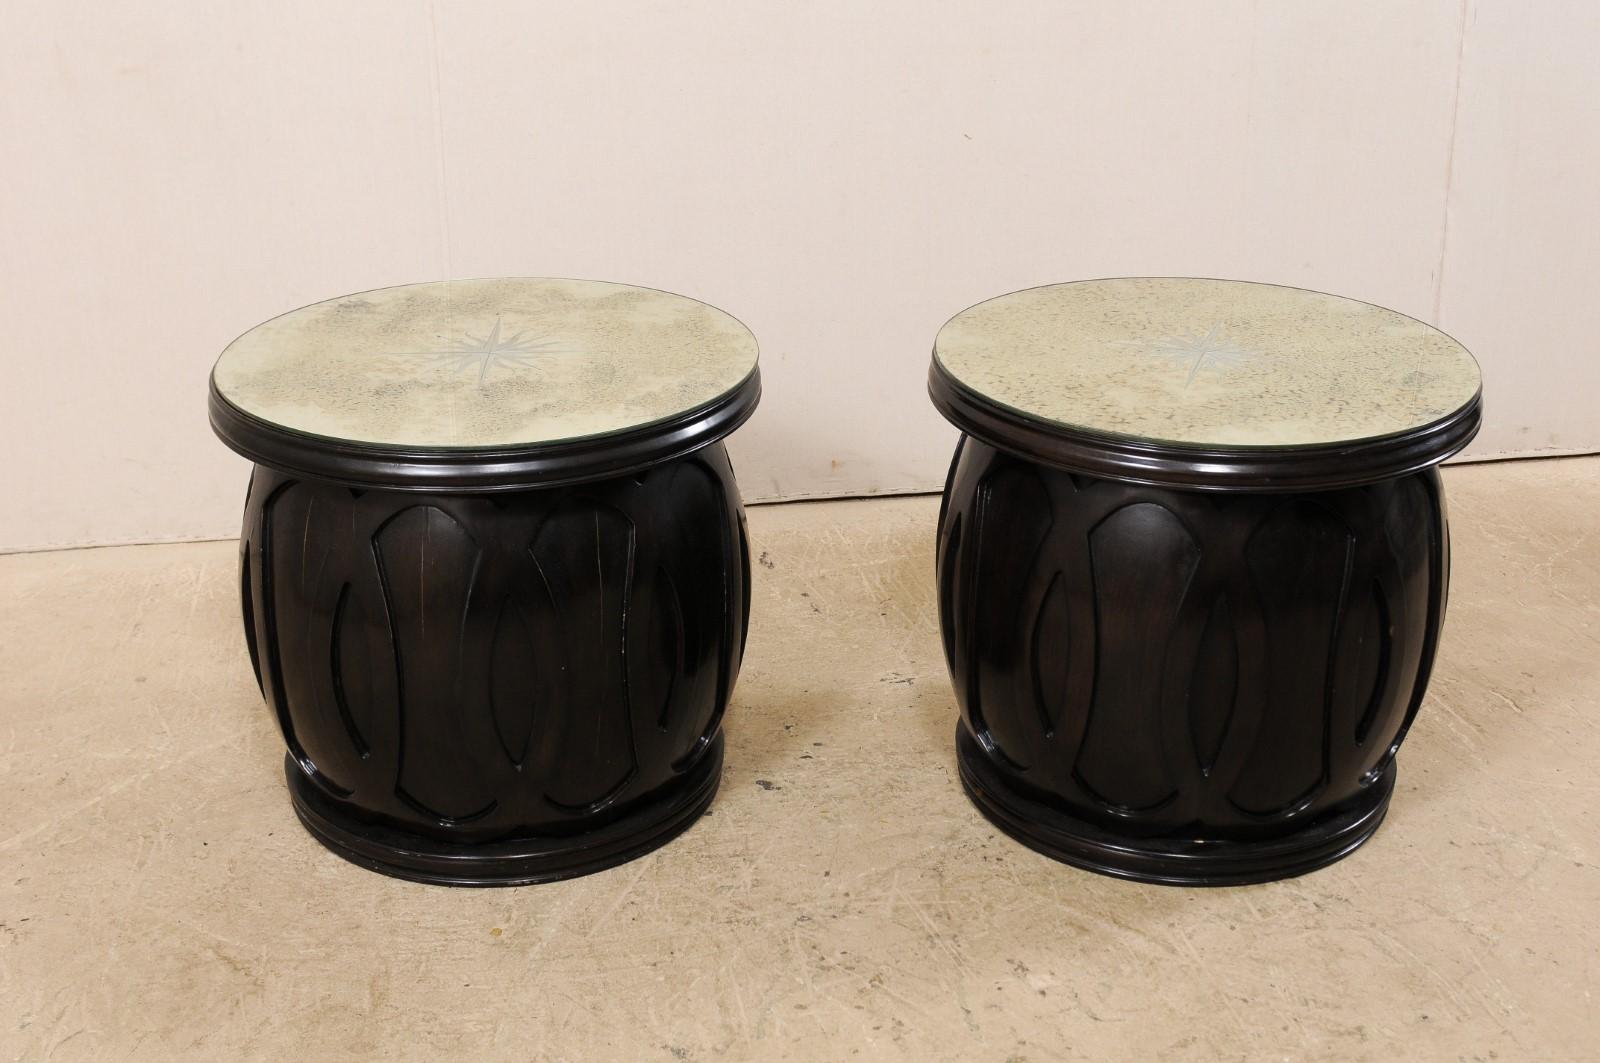 A pair of vintage drum-style side table bases which have been topped with artisan made mirror tops. This pair of side tables feature new artisan made 27.5